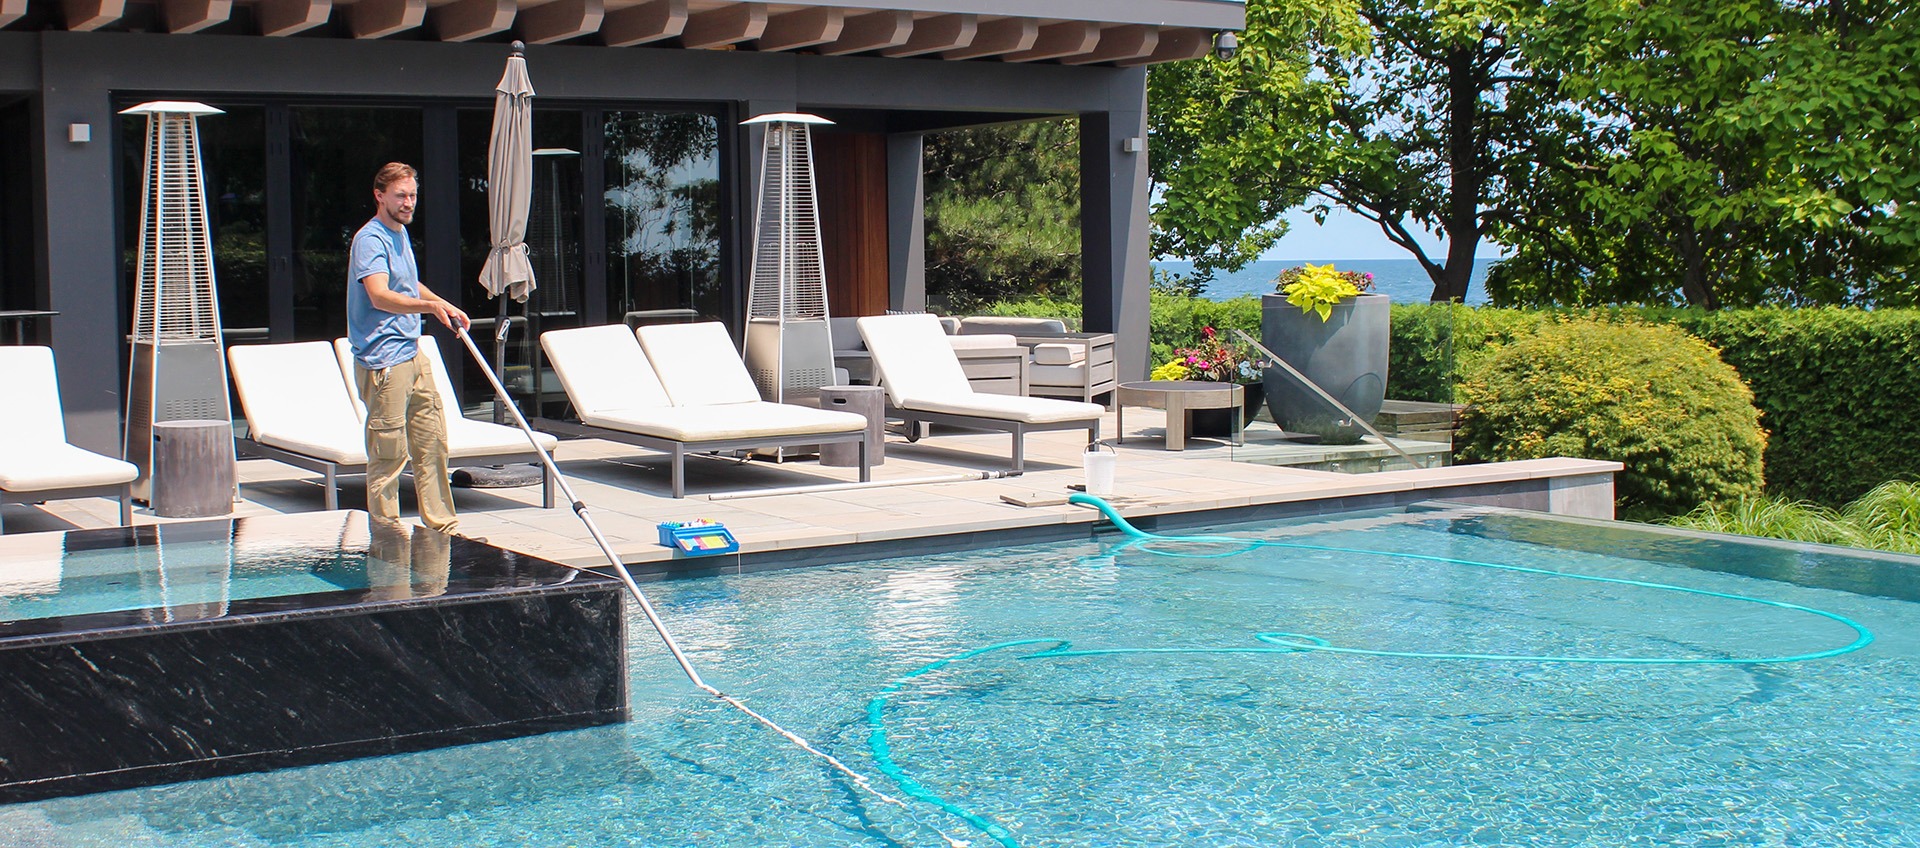 A person is cleaning a luxurious infinity pool with a skimmer net, surrounded by sun loungers, in a scenic outdoor setting with lush greenery.